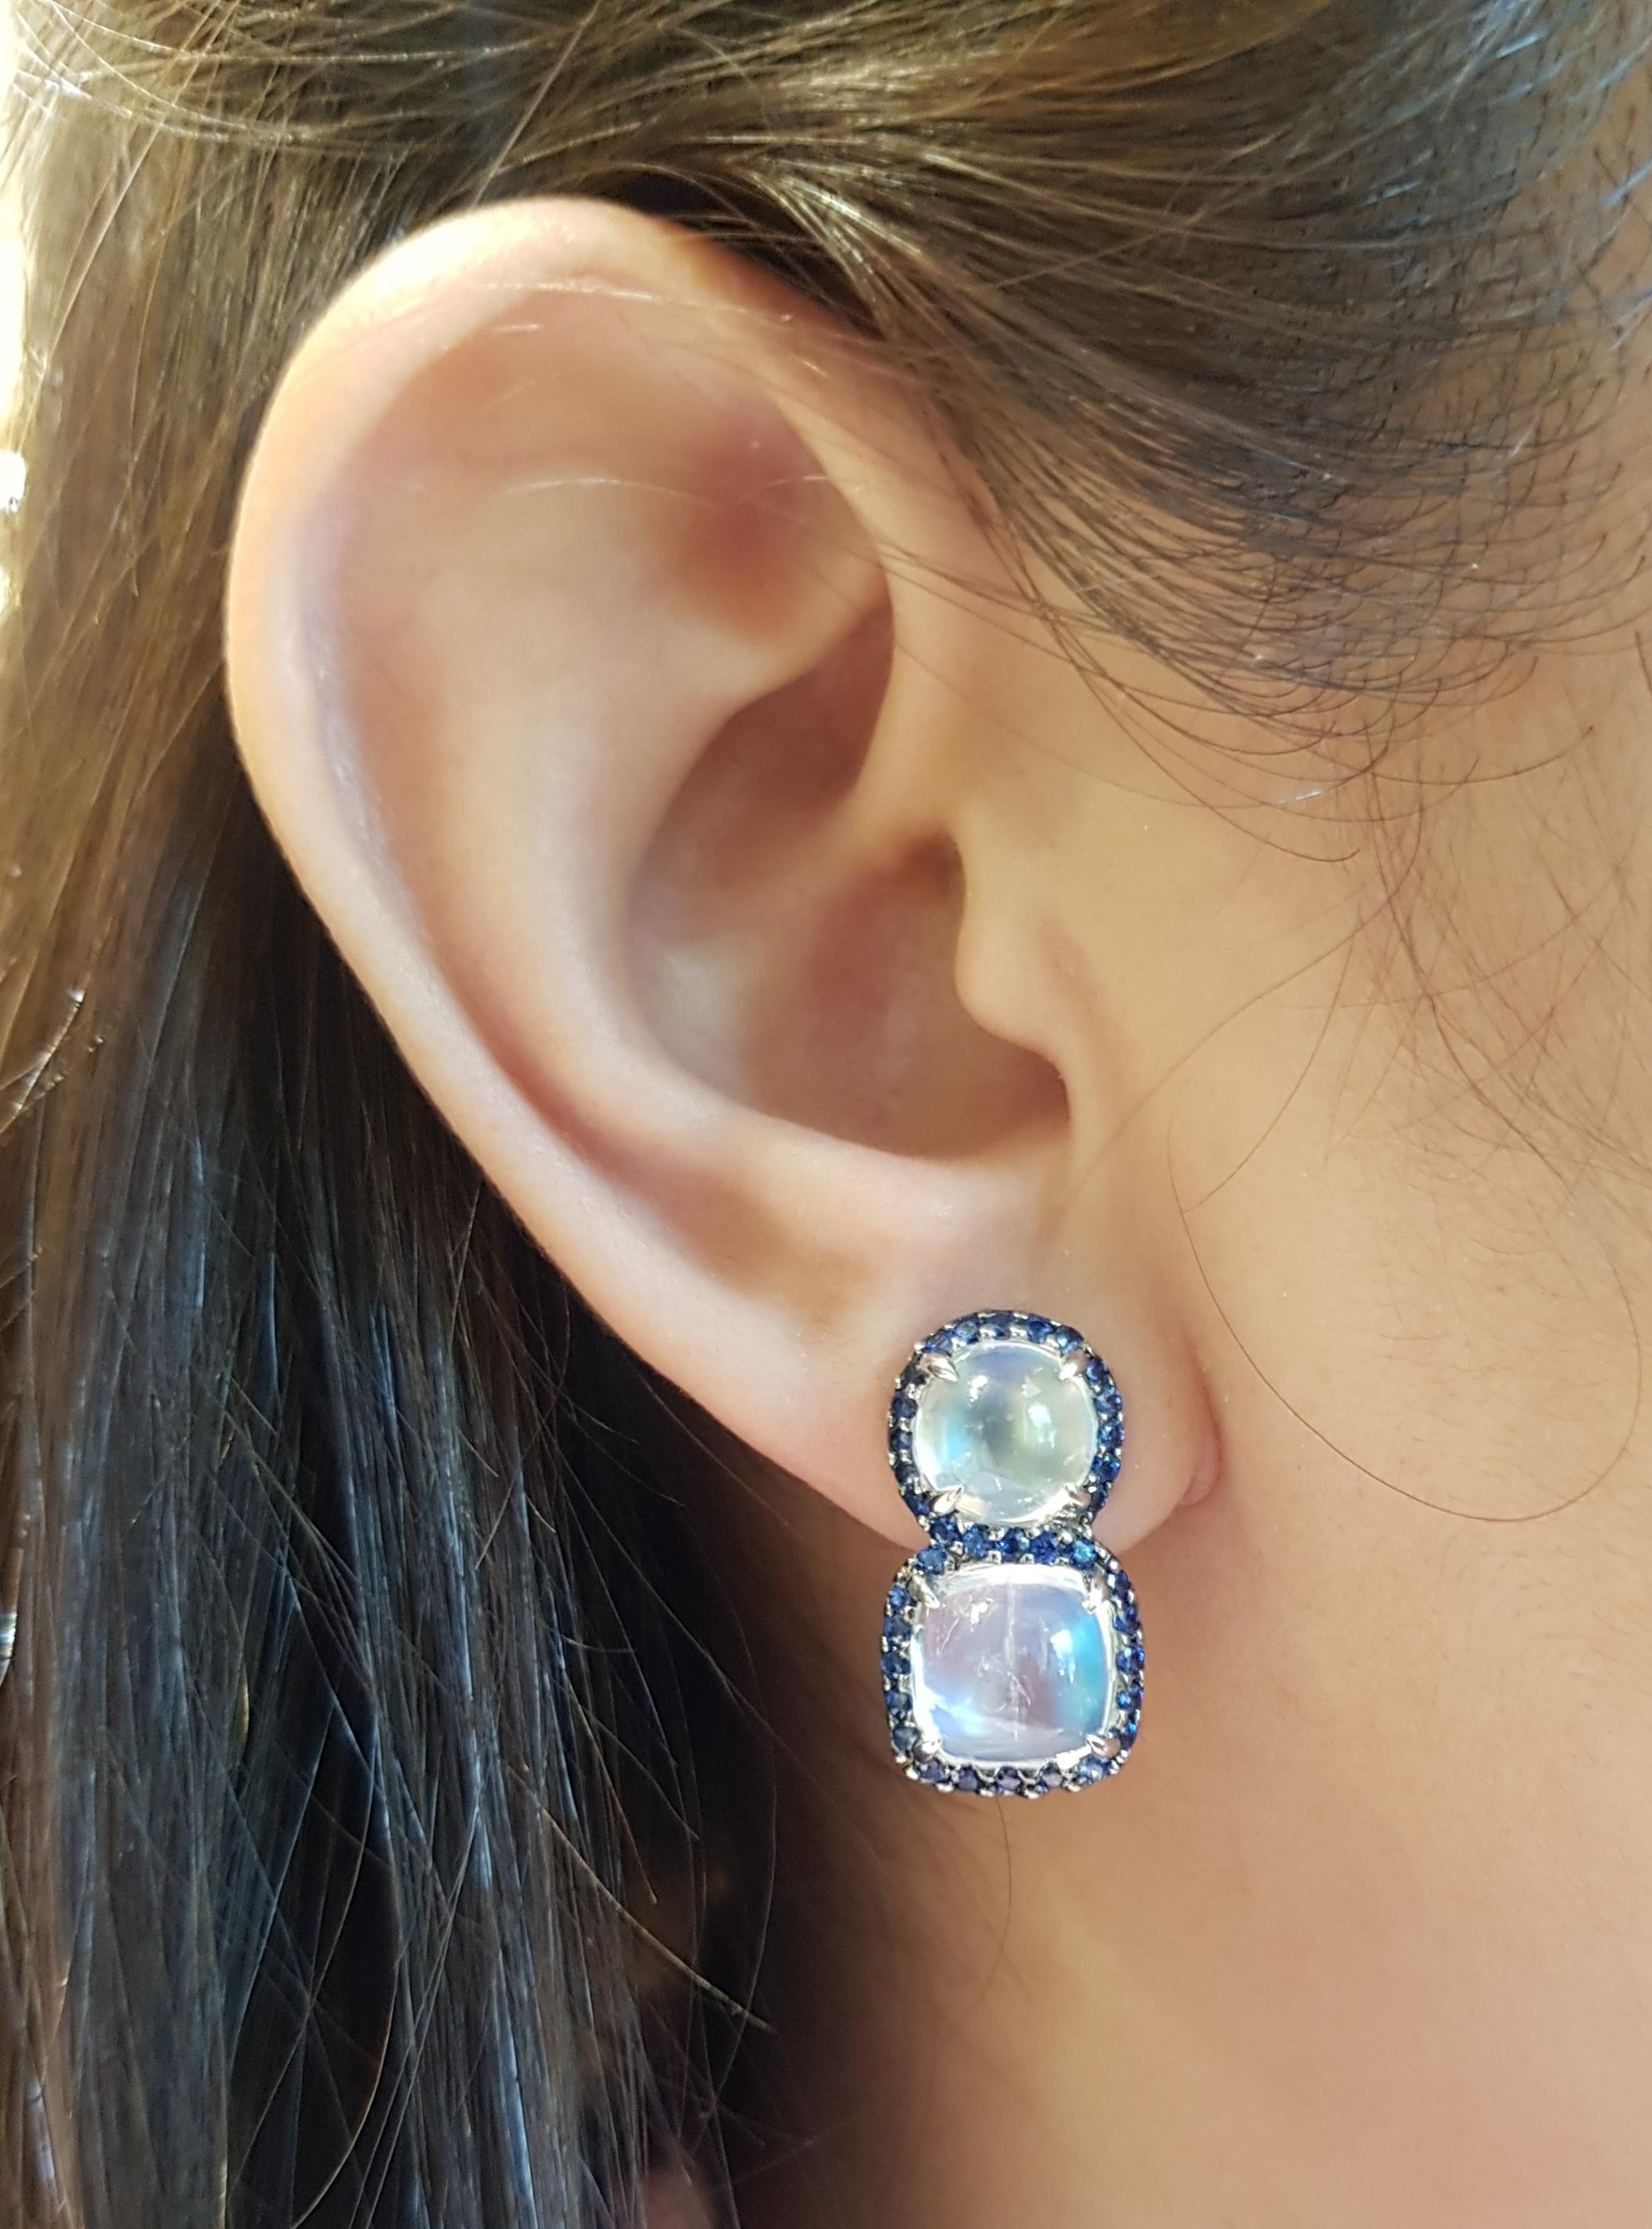 Moonstone 12.43 carats with Blue Sapphire 1.35 carats Earrings set in 18 Karat White Gold Settings

Width:  1.1 cm 
Length: 2.1 cm
Total Weight: 11.17 grams

